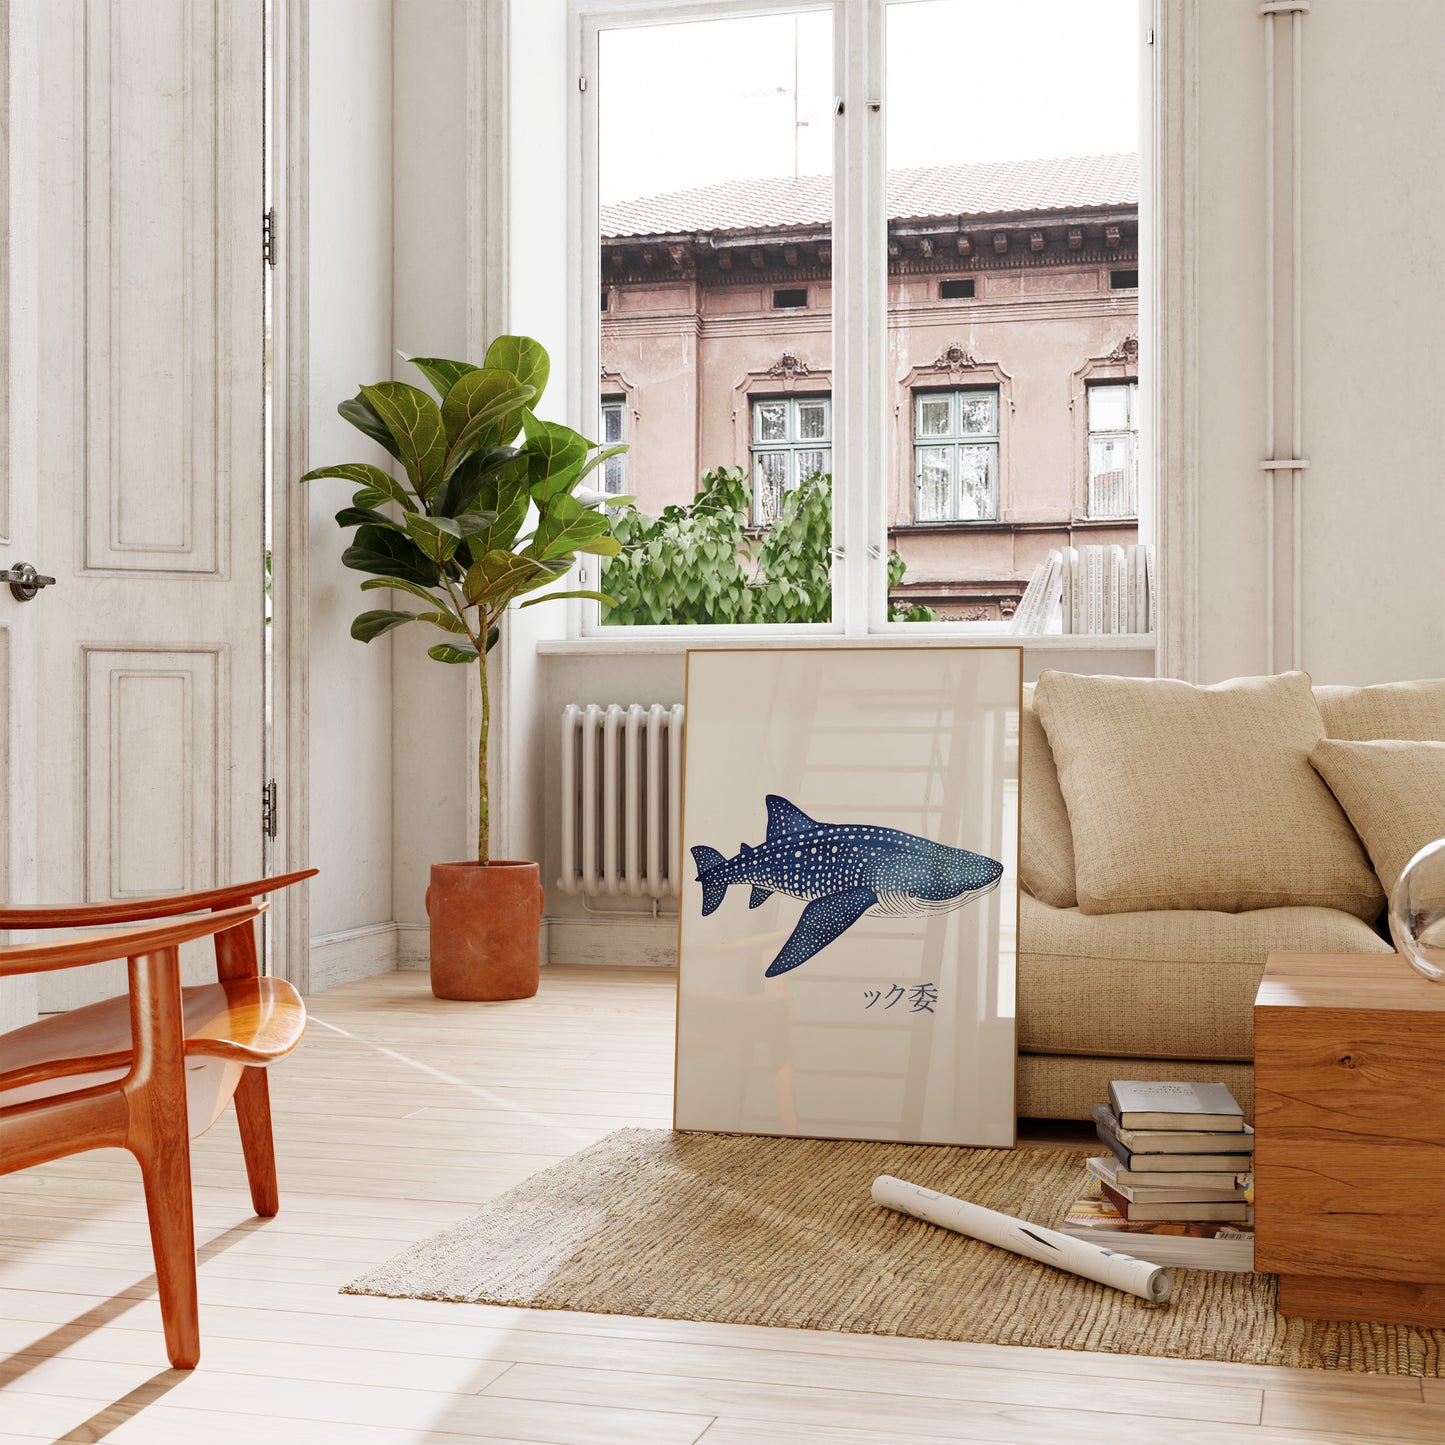 Modern living room interior with a sofa, wooden furniture, and a large framed whale poster.